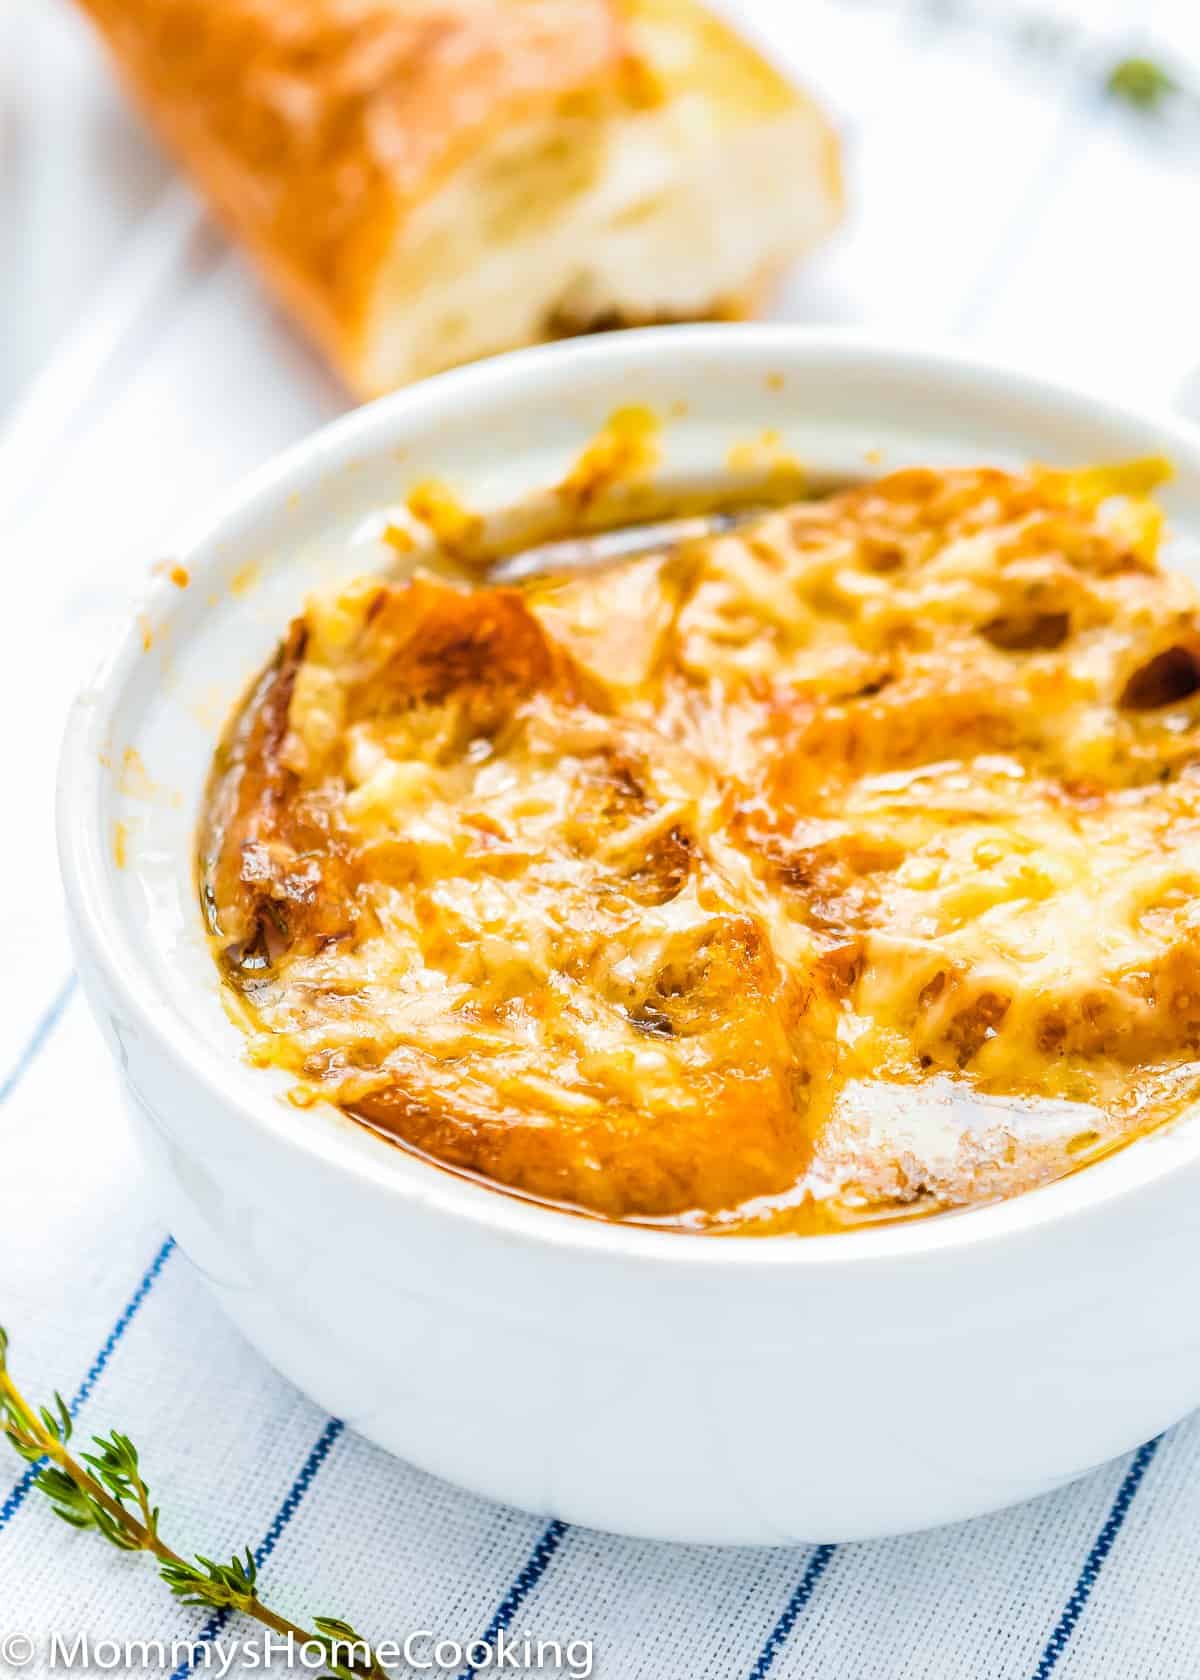 onion soup in a bowl with melted cheese and bread